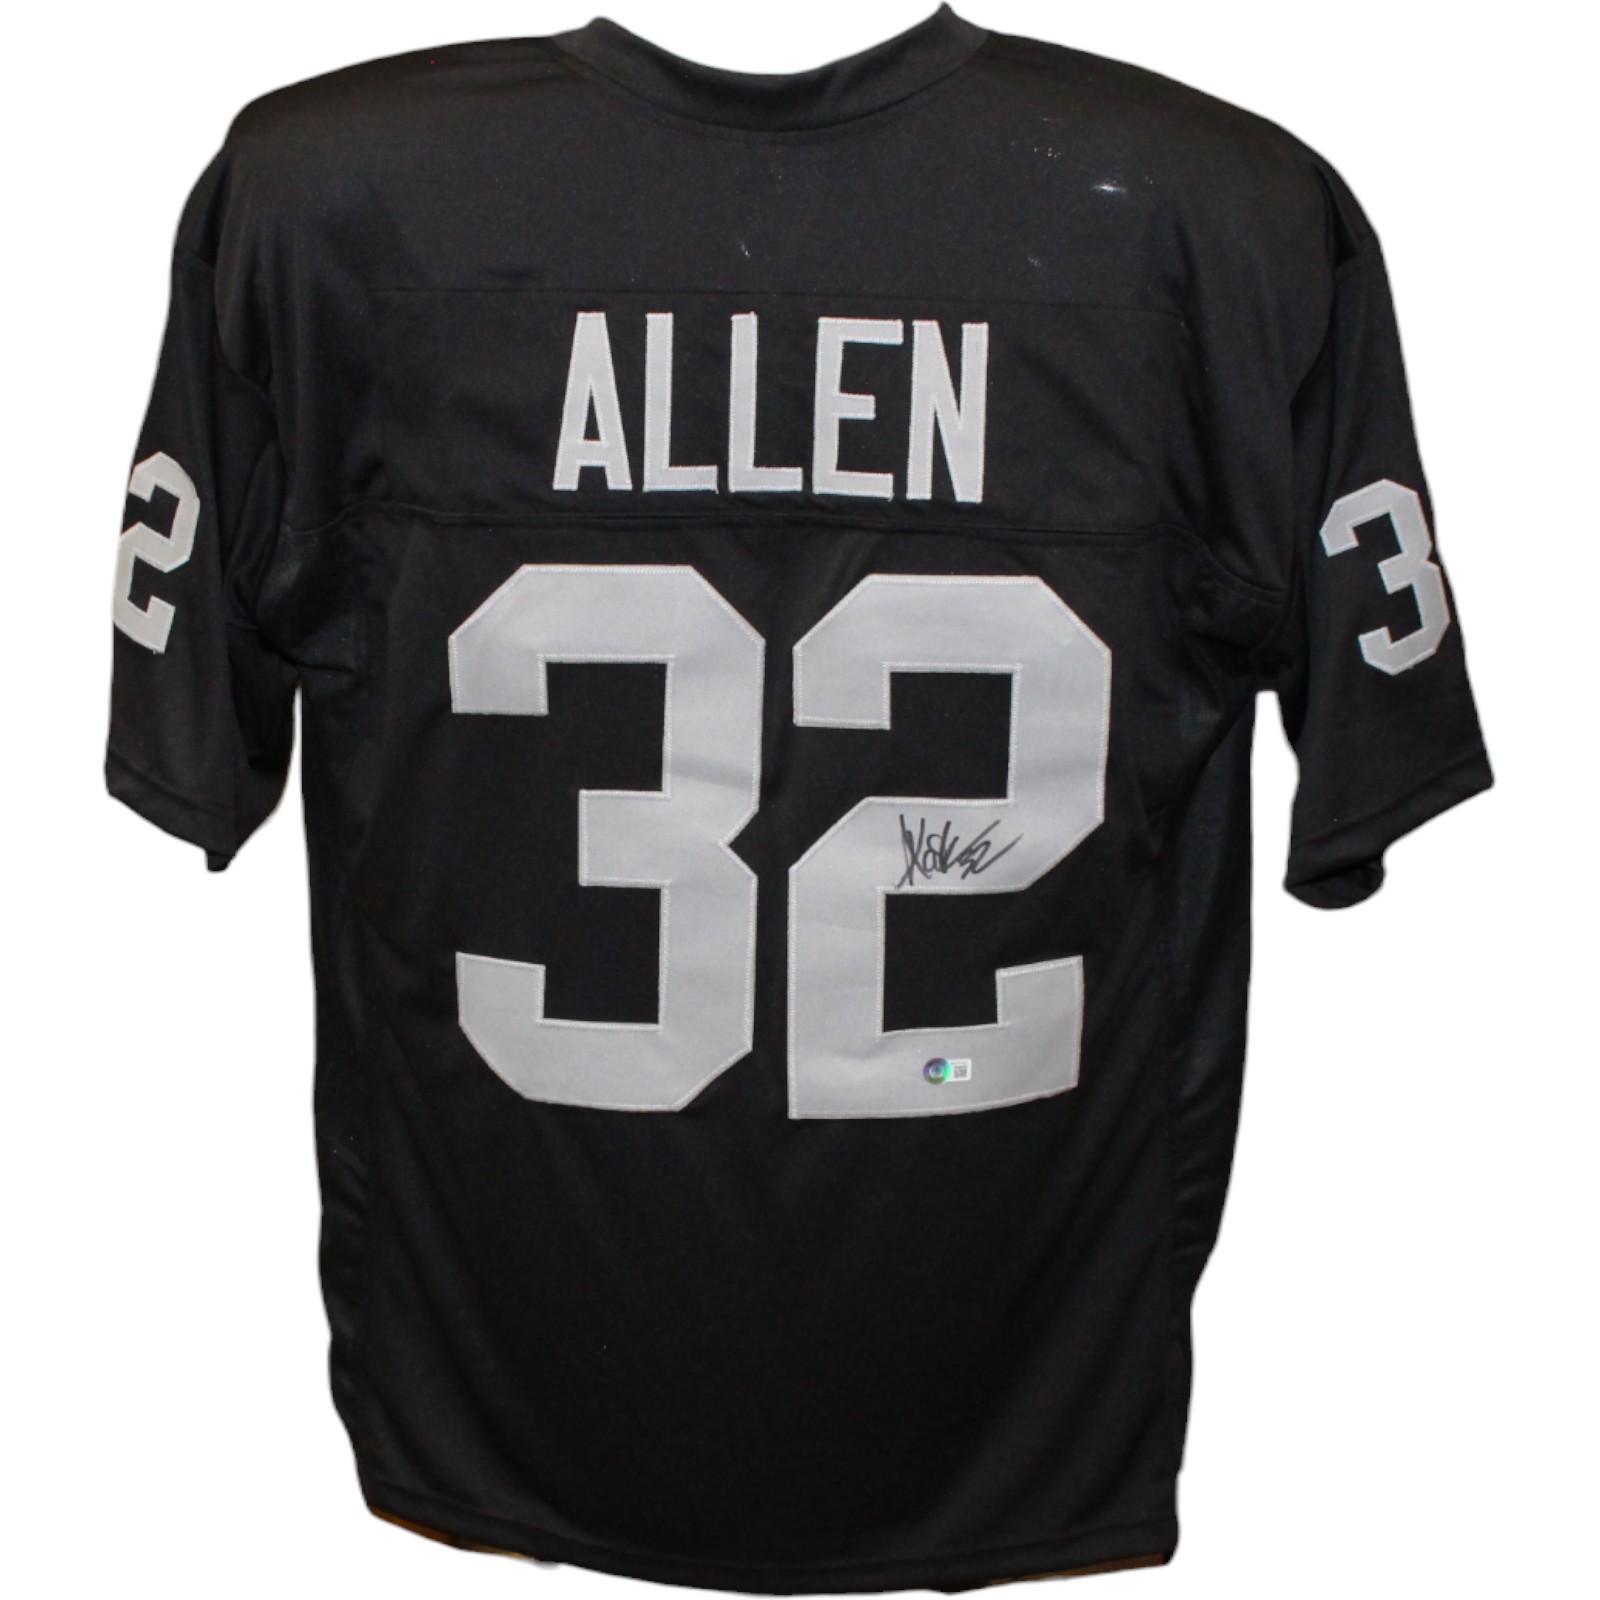 Marcus Allen Autographed/Signed Pro Style Black Jersey Beckett